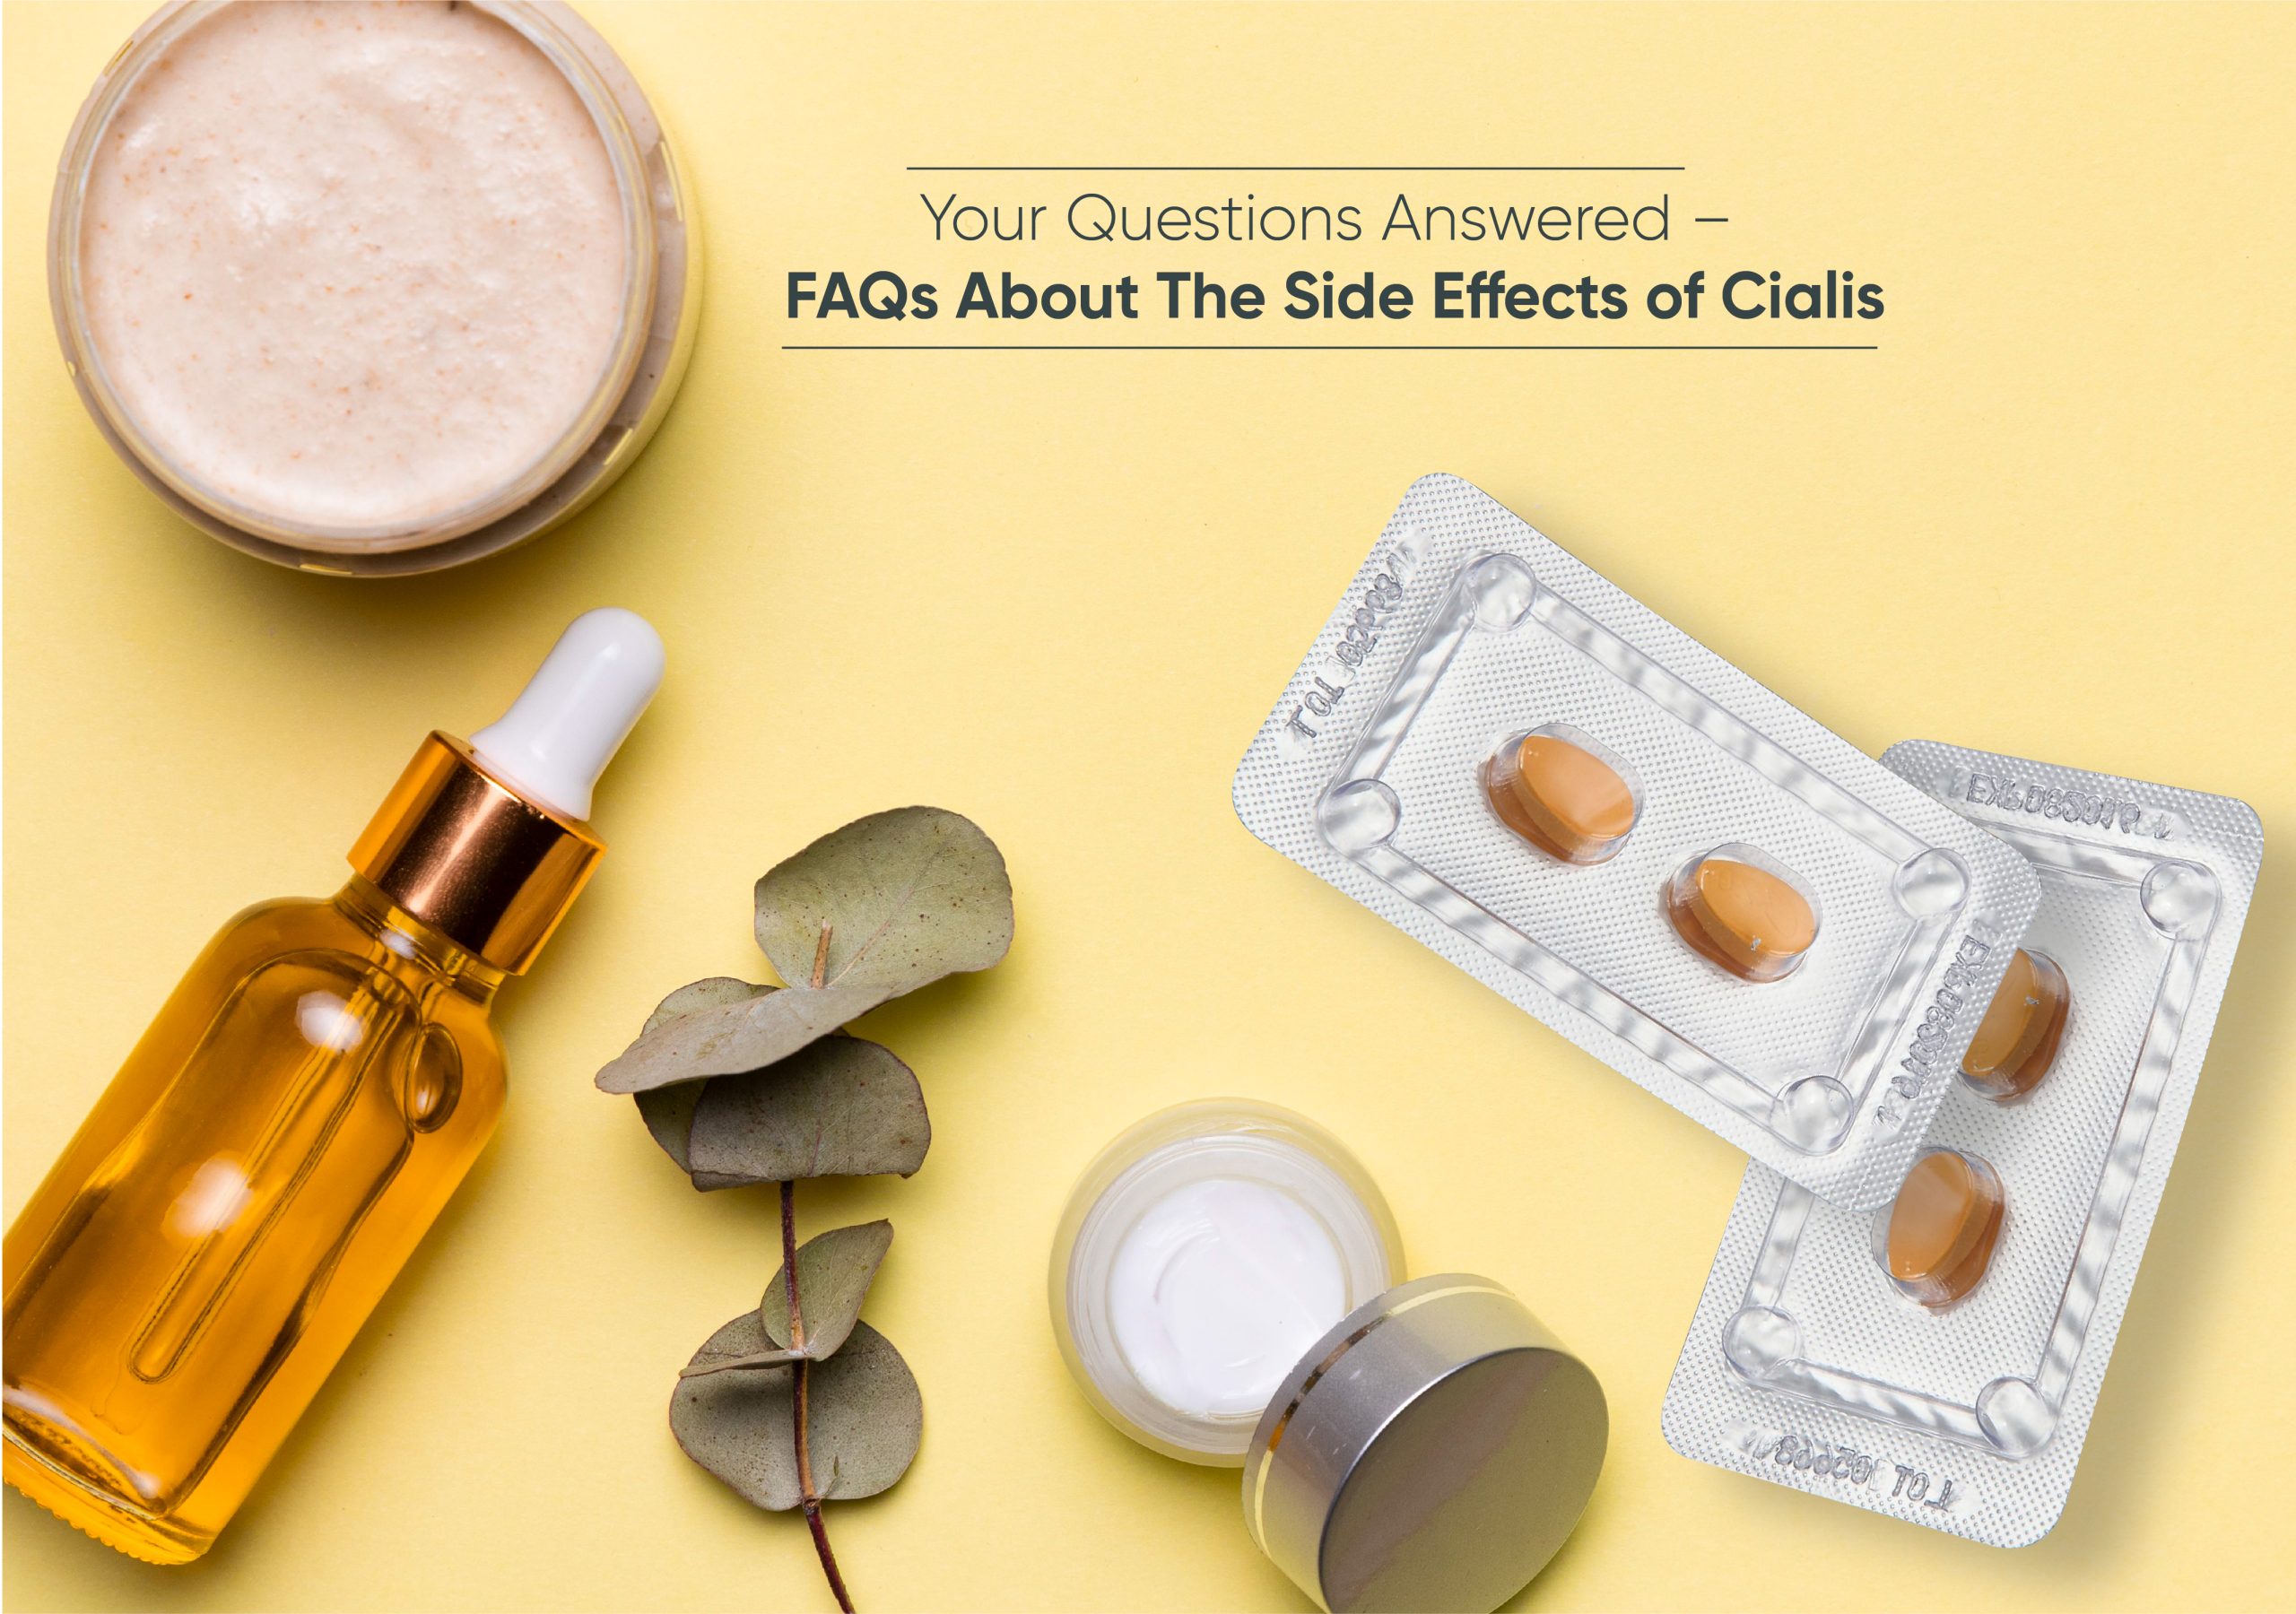 faqs-about-the-side-effects-of-cialis